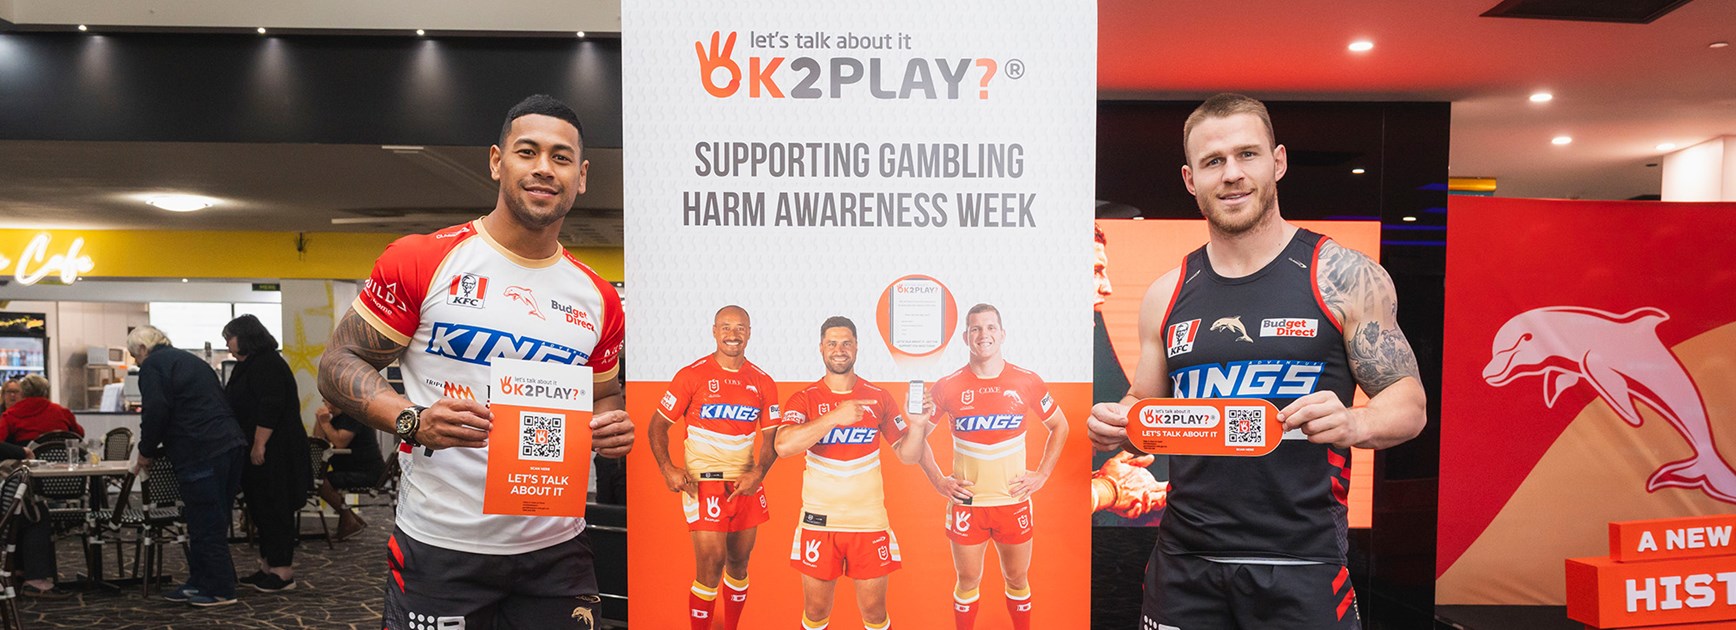 OK2Play? and Dolphins join forces for Gambling Harm Awareness Week